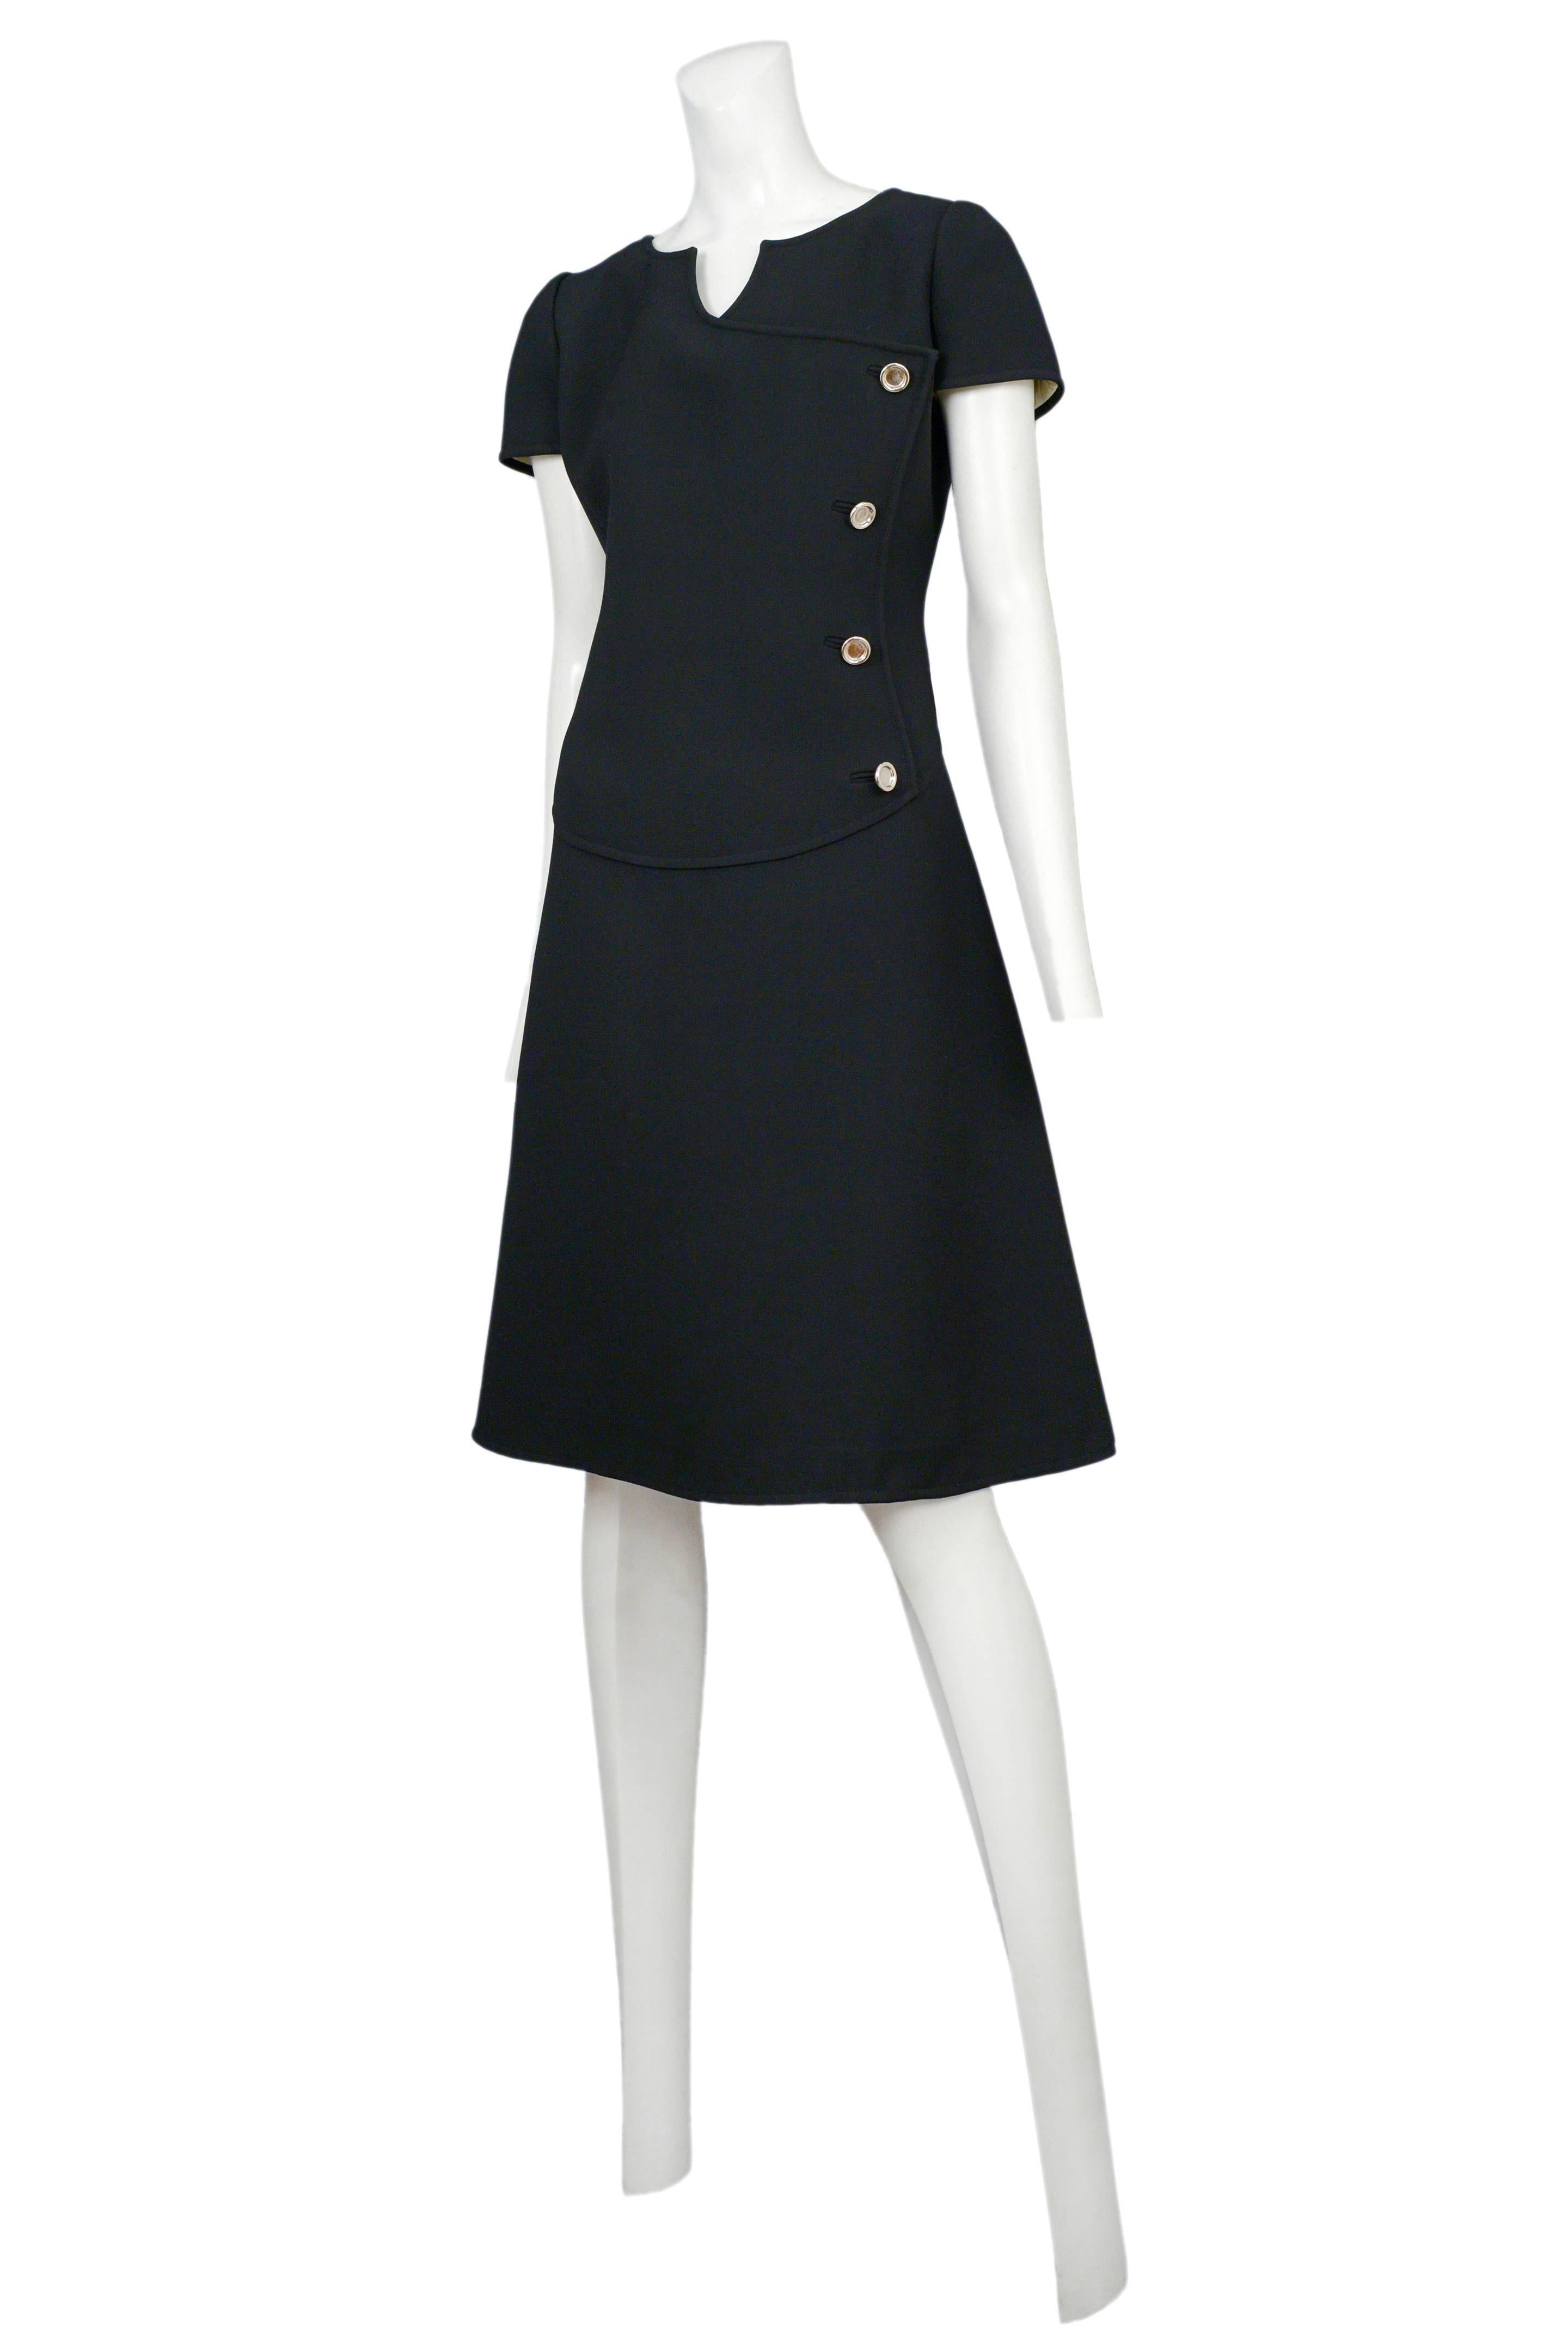 Vintage Courreges black knee length wool day dress featuring four silver side buttons and short sleeves. 
Please inquire for additional images.